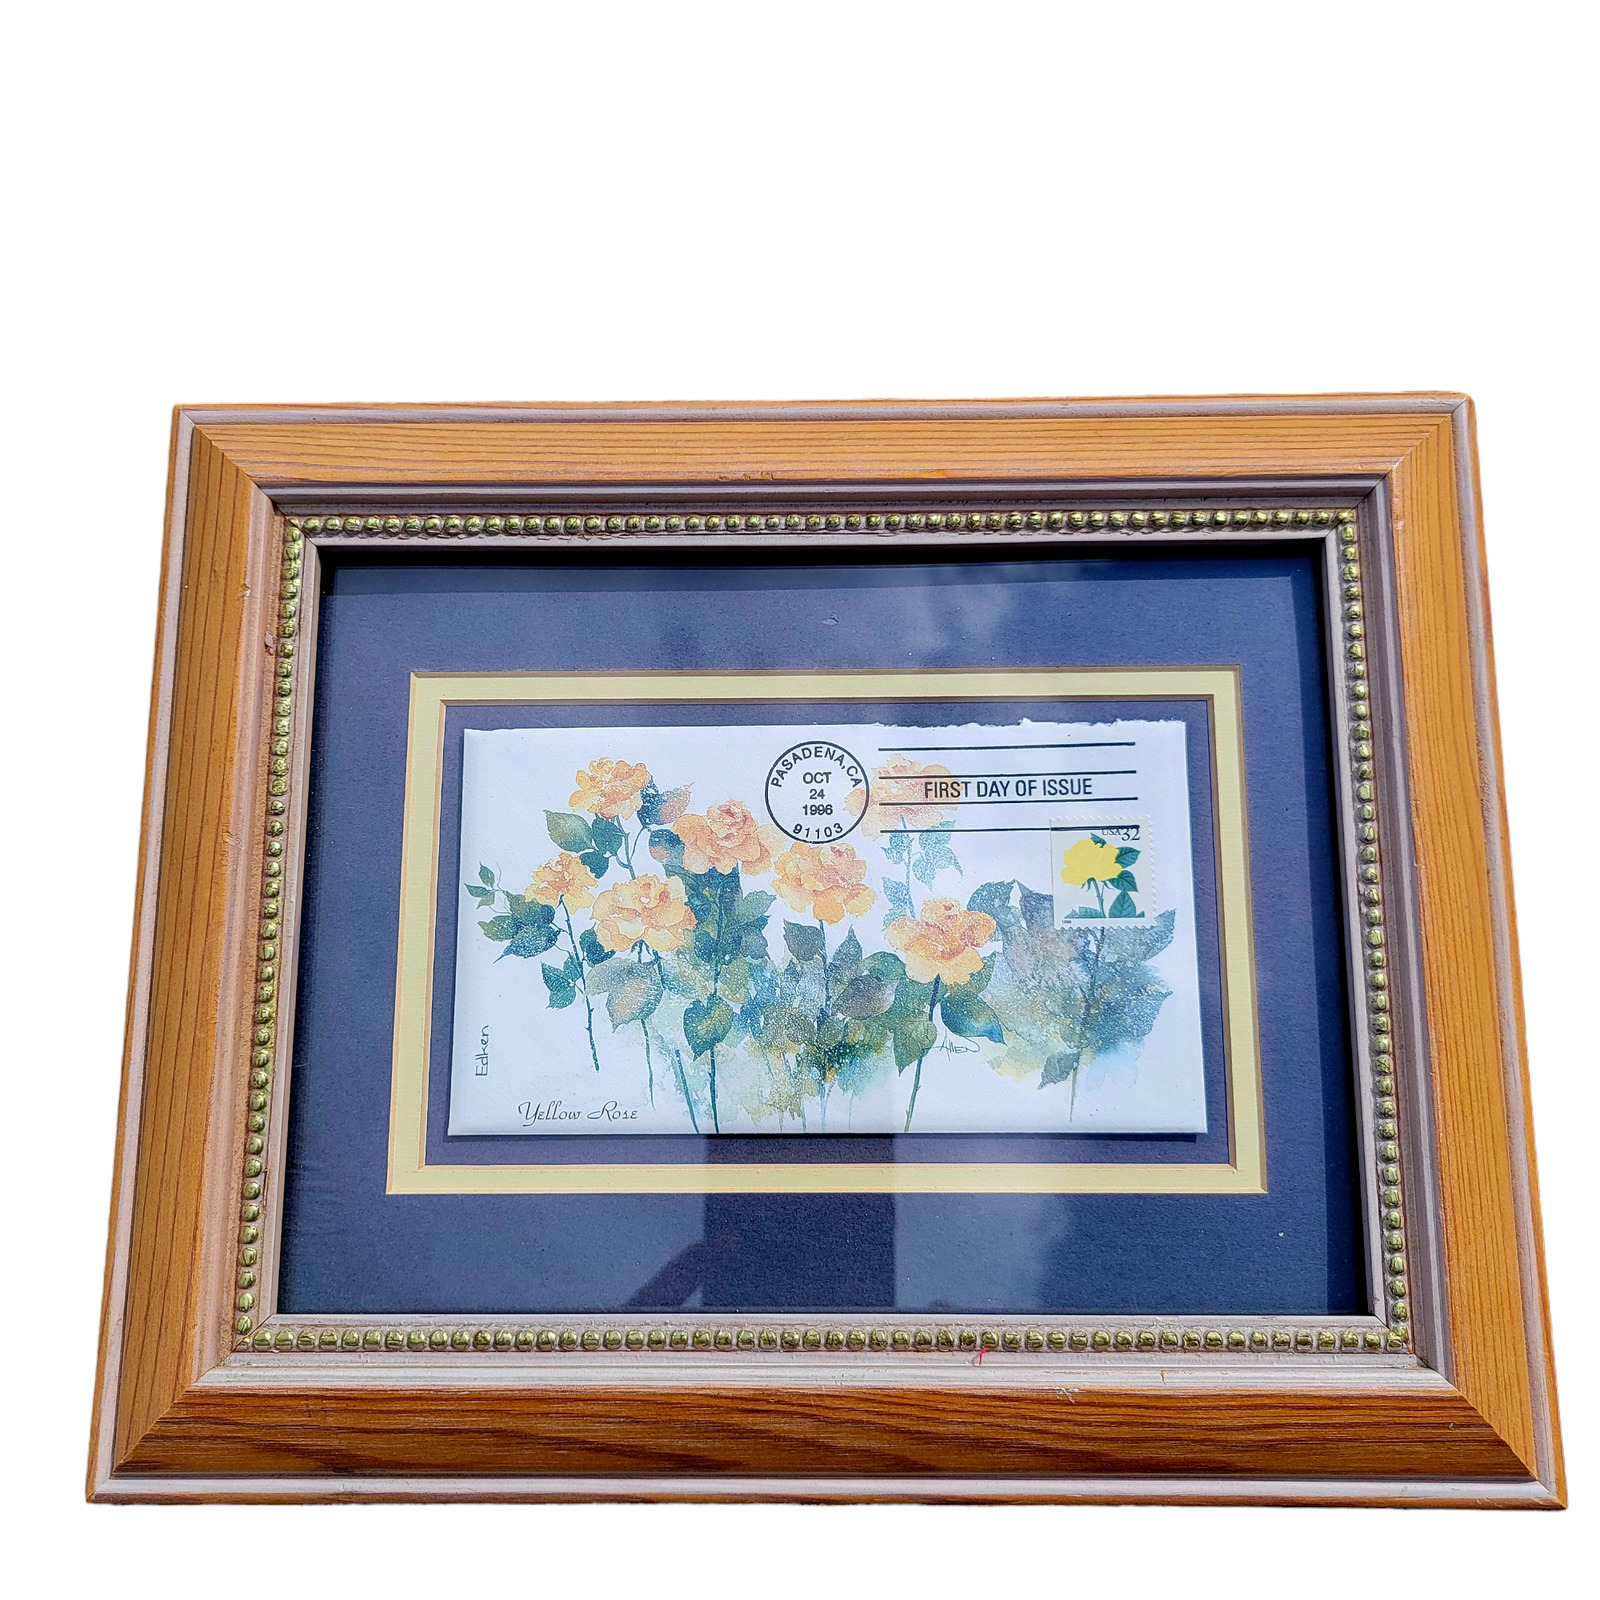 First Day of Issue Pasadena California October 1996 Yellow Rose Framed